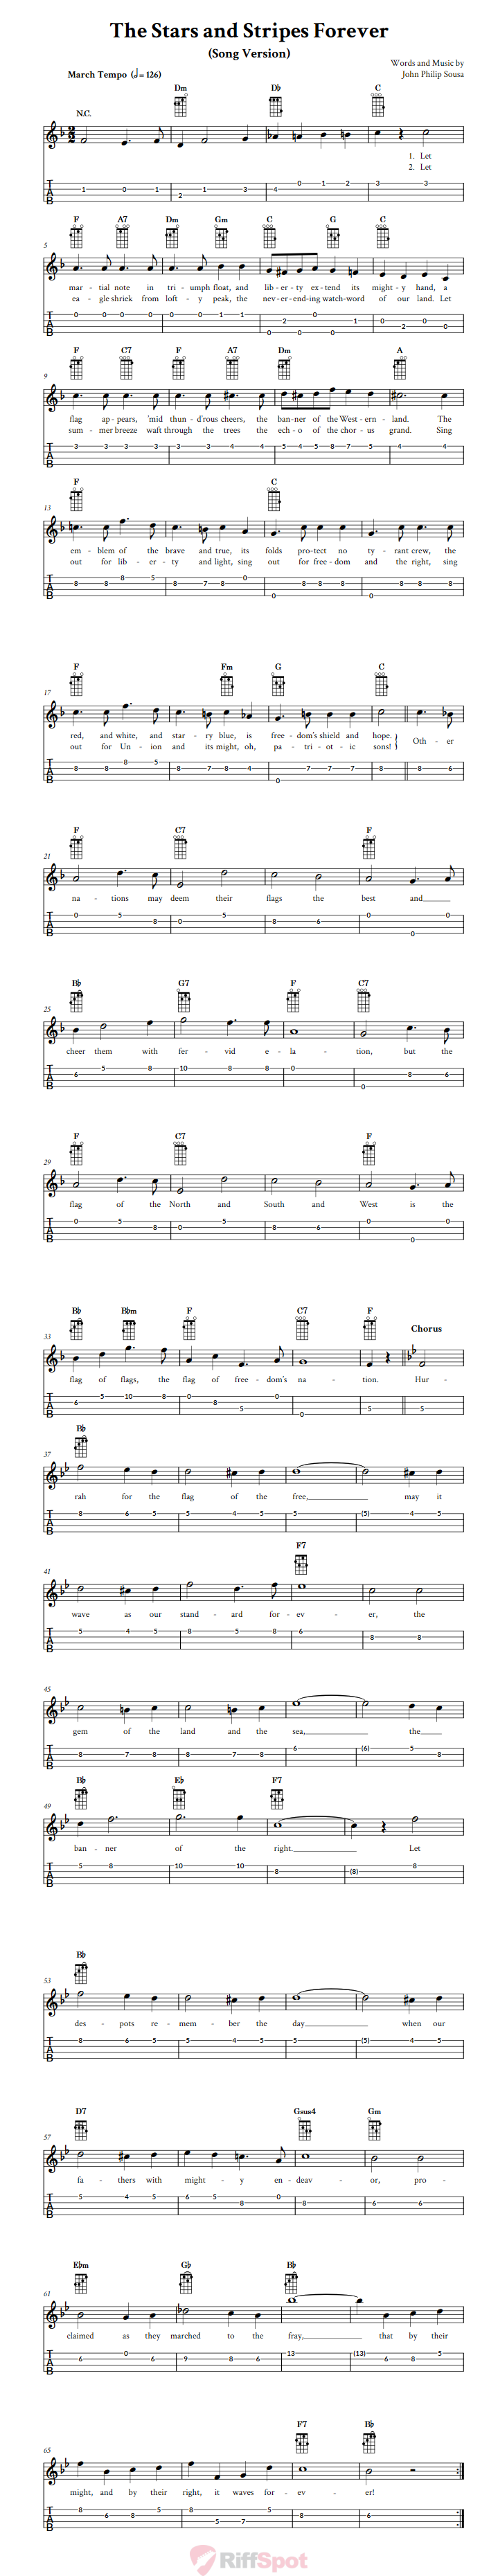 The Stars and Stripes Forever (Song) Ukulele Tab